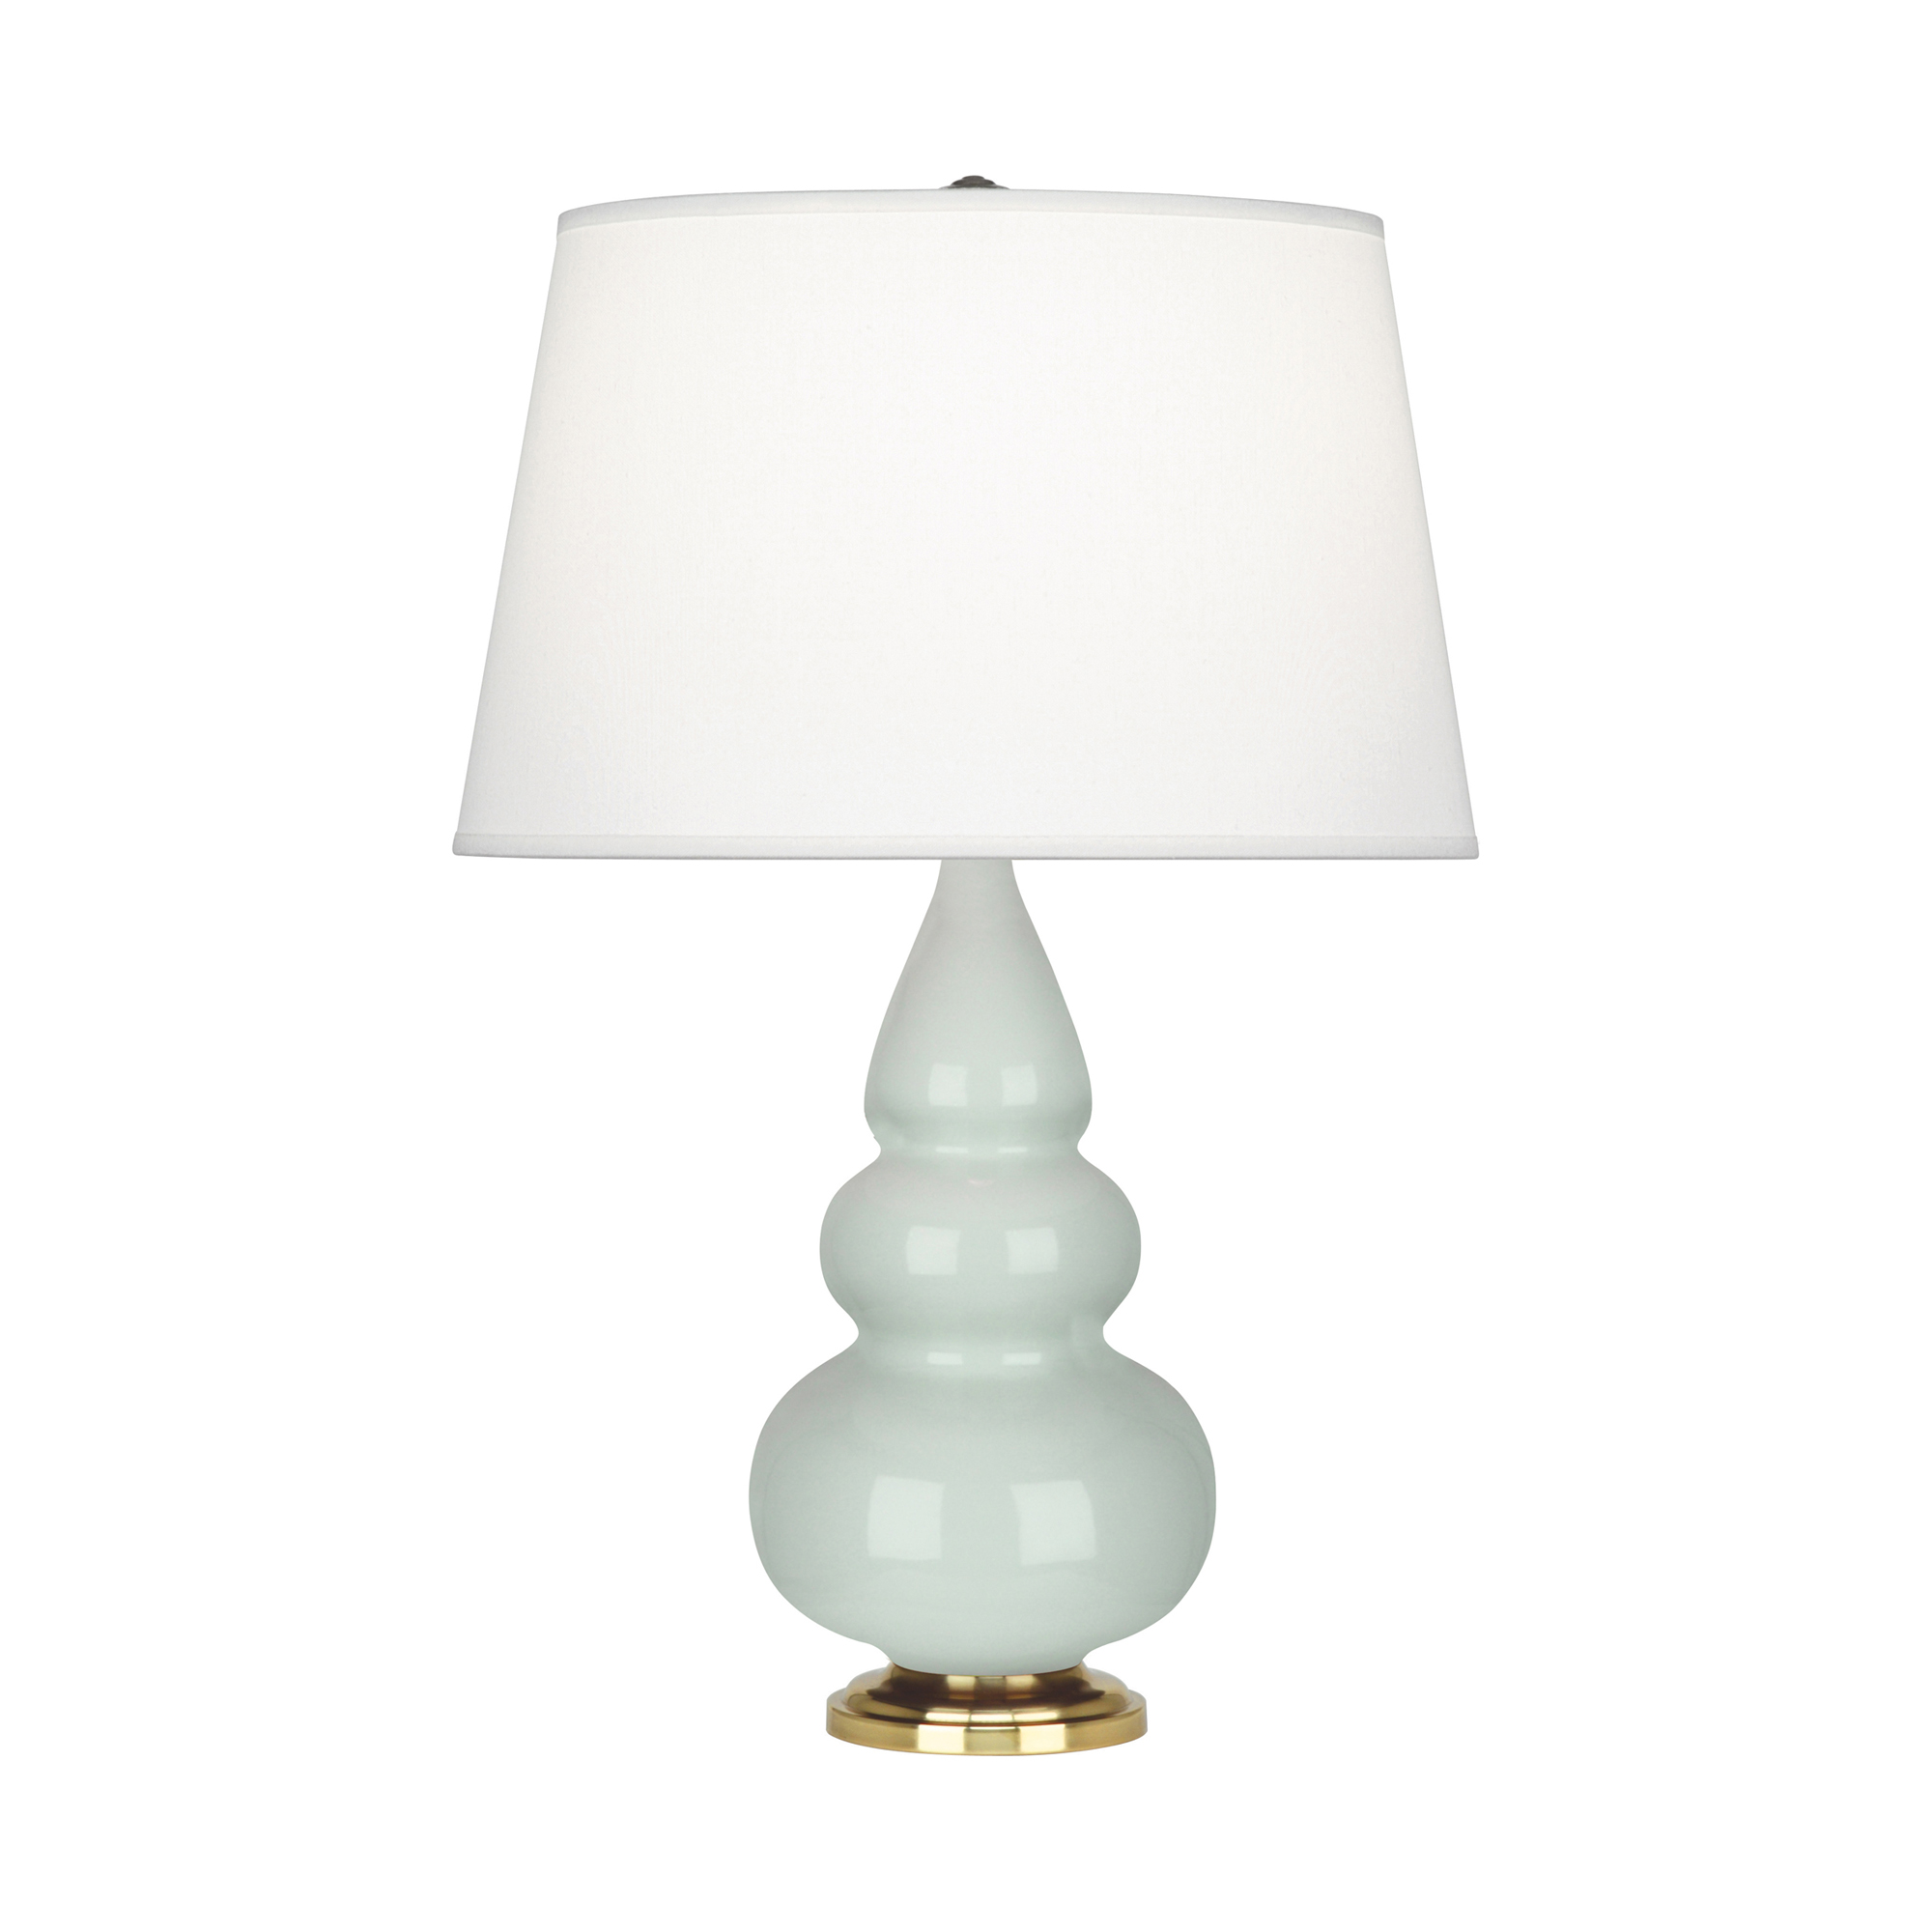 Small Triple Gourd Accent Lamp Style #256X